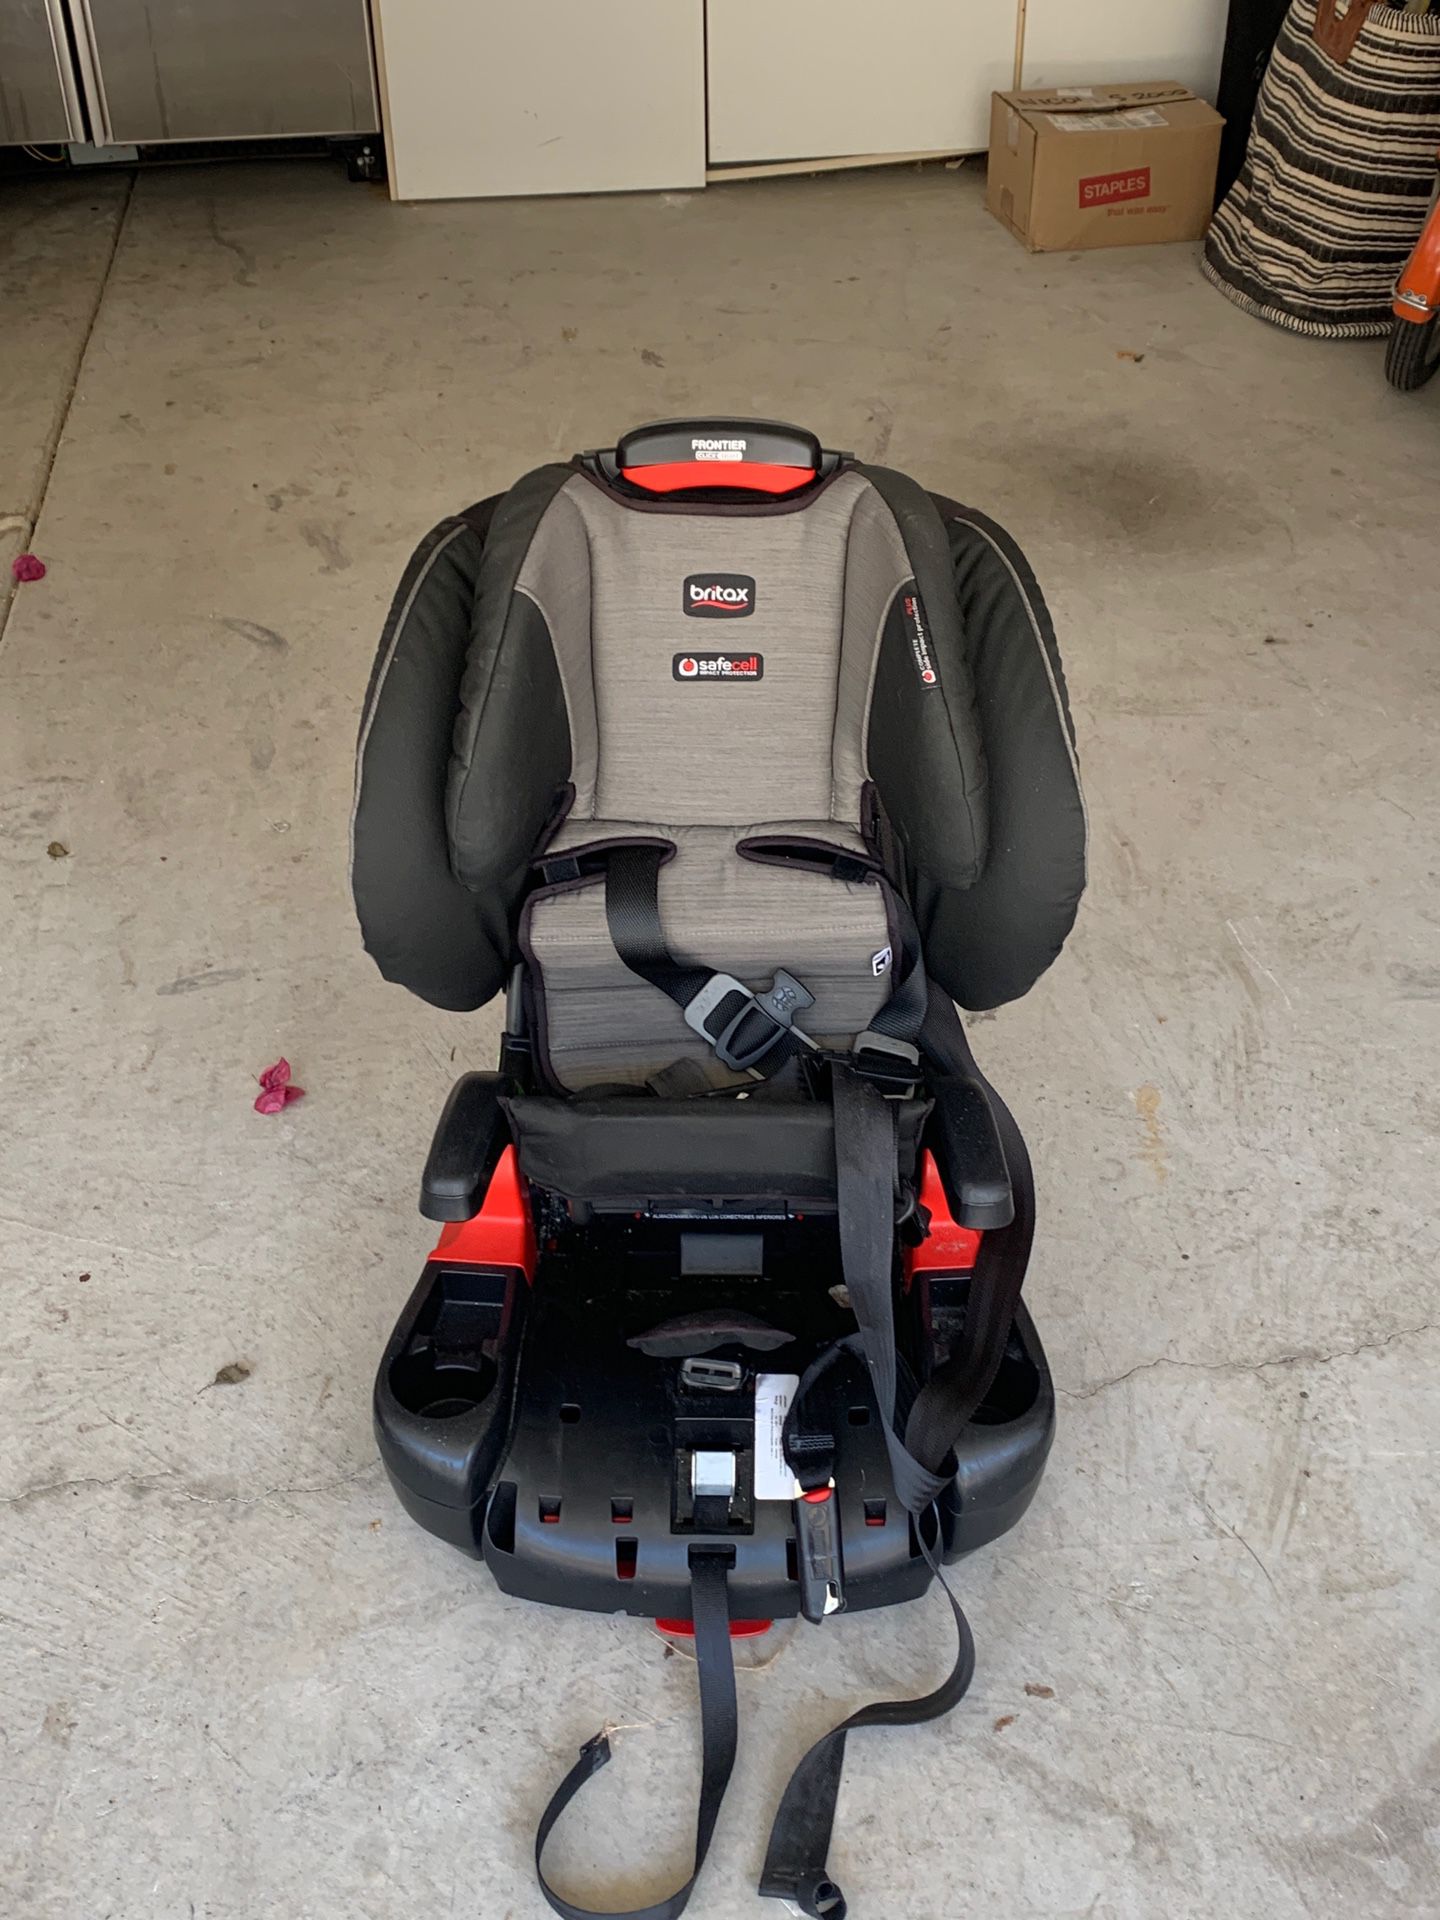 Britax car seat. Rarely used. Perfect condition